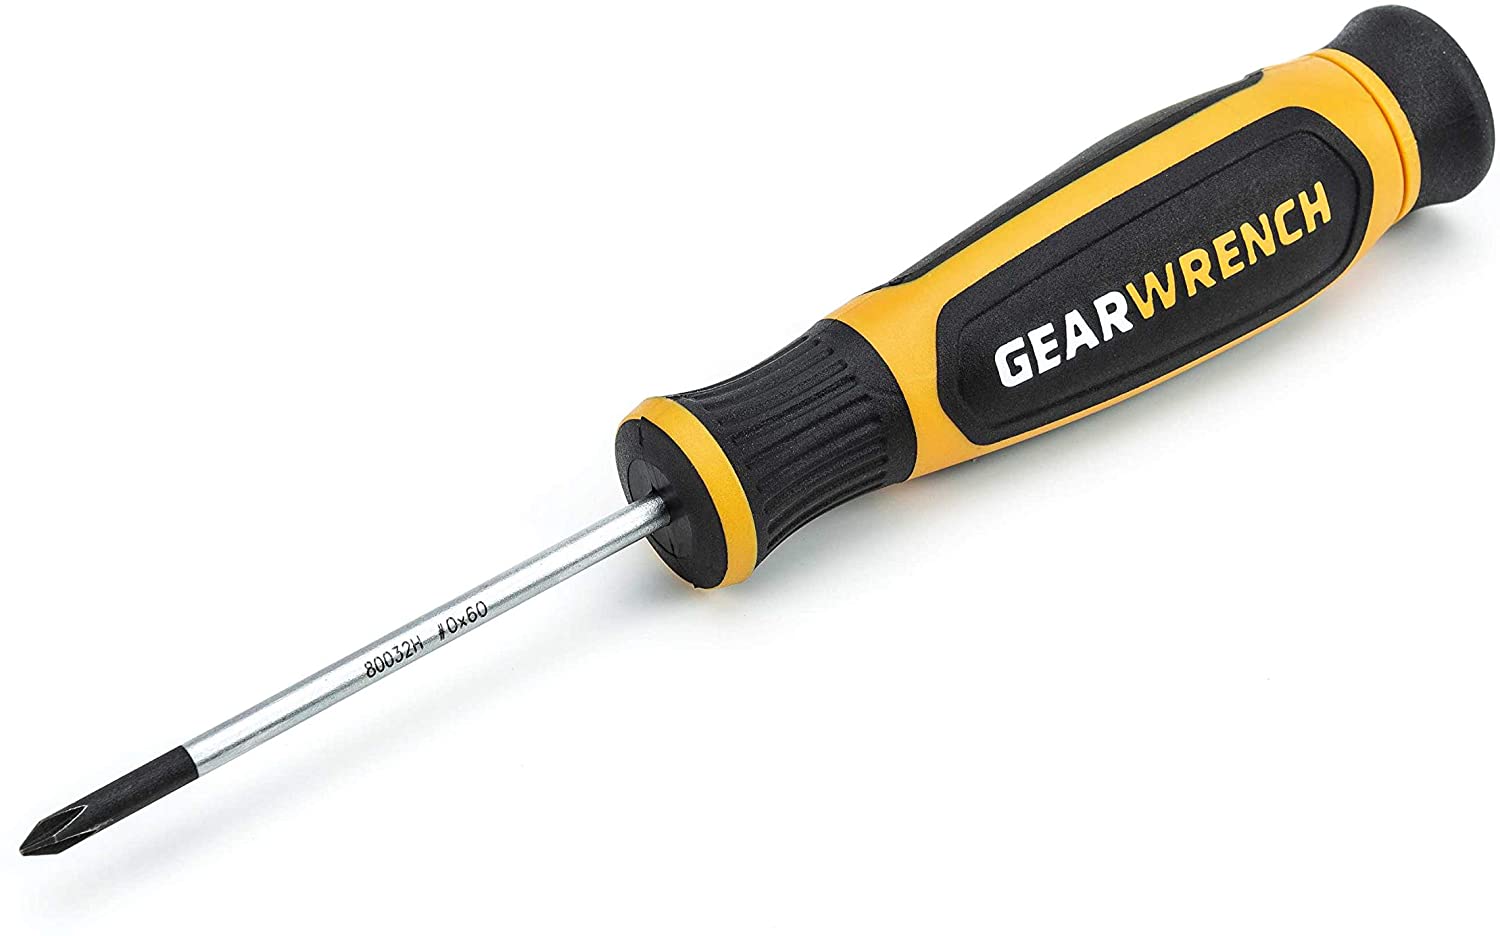 Electric Dreams EDL009 - GearWrench Phillips Screwdriver - #0 x 60mm